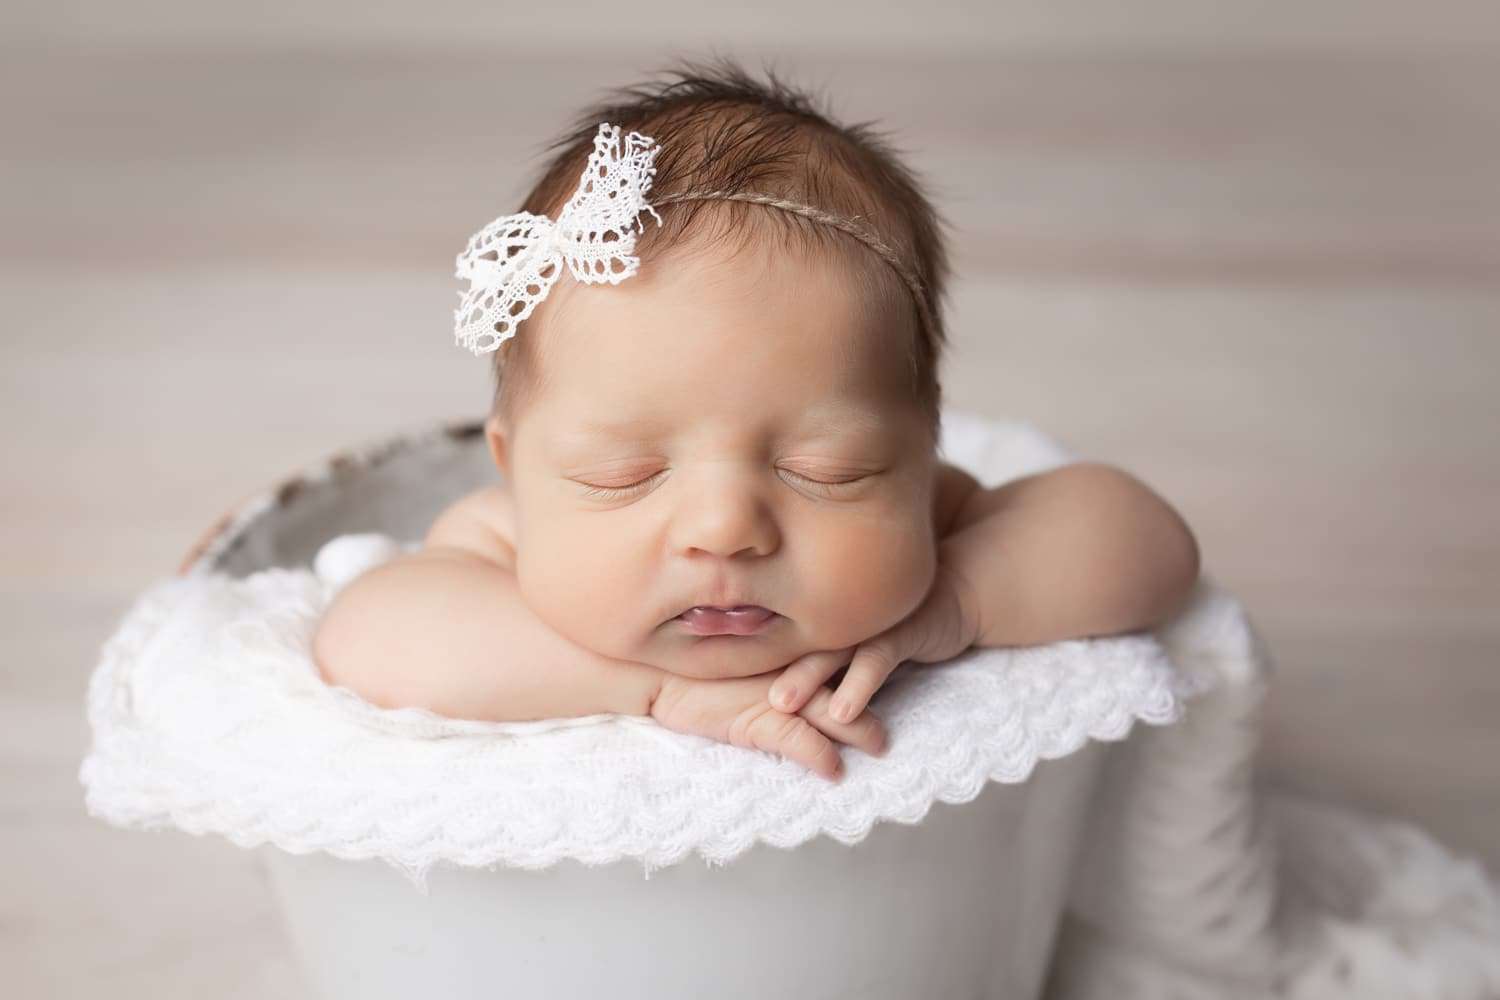 newborn photographer in rochester ny captures newborn baby girl sleeping chin on hands in a bucket